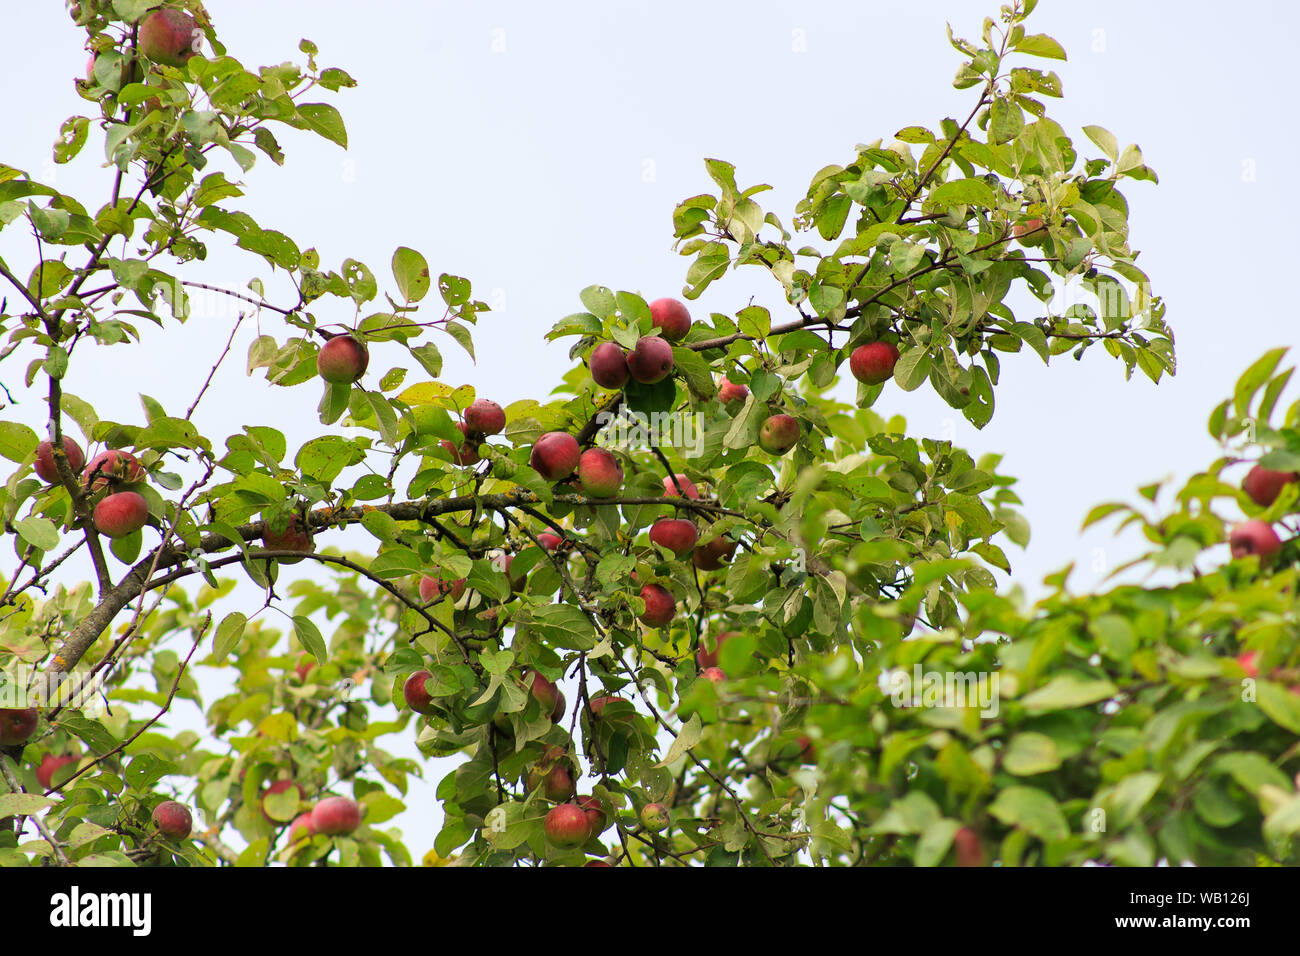 https://c8.alamy.com/comp/WB126J/organic-apples-hanging-from-a-tree-branch-apple-fruit-close-up-large-ripe-apples-clusters-hanging-heap-on-a-tree-branch-in-an-intense-apple-orchard-WB126J.jpg